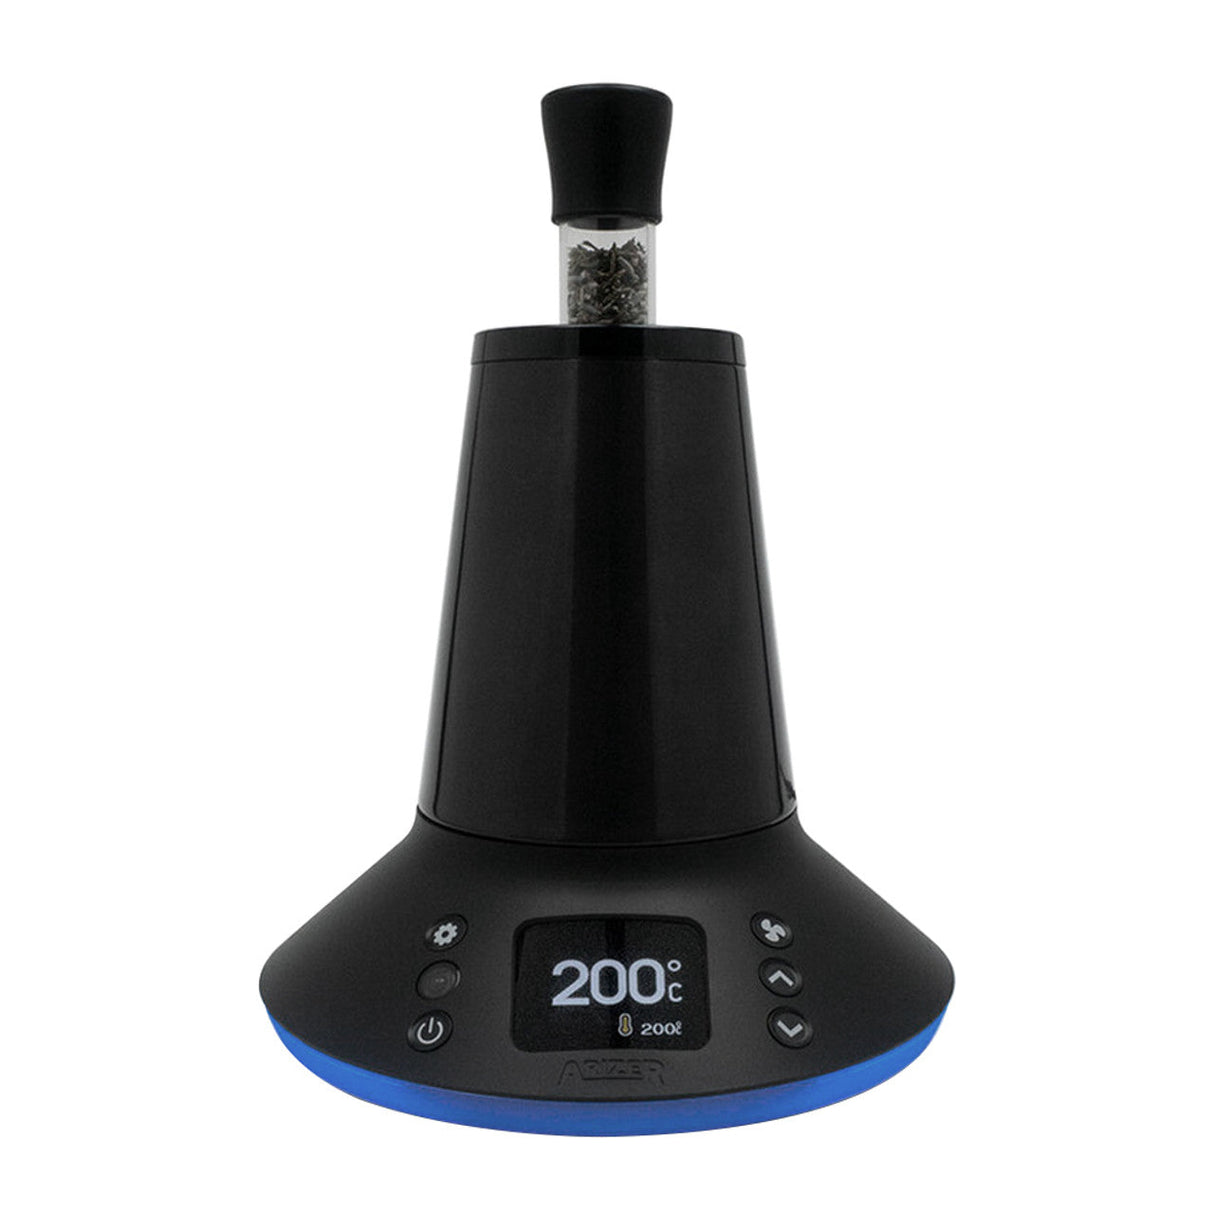 Arizer XQ2 Extreme Q v2 Black Vaporizer, Front View with Digital Temperature Display